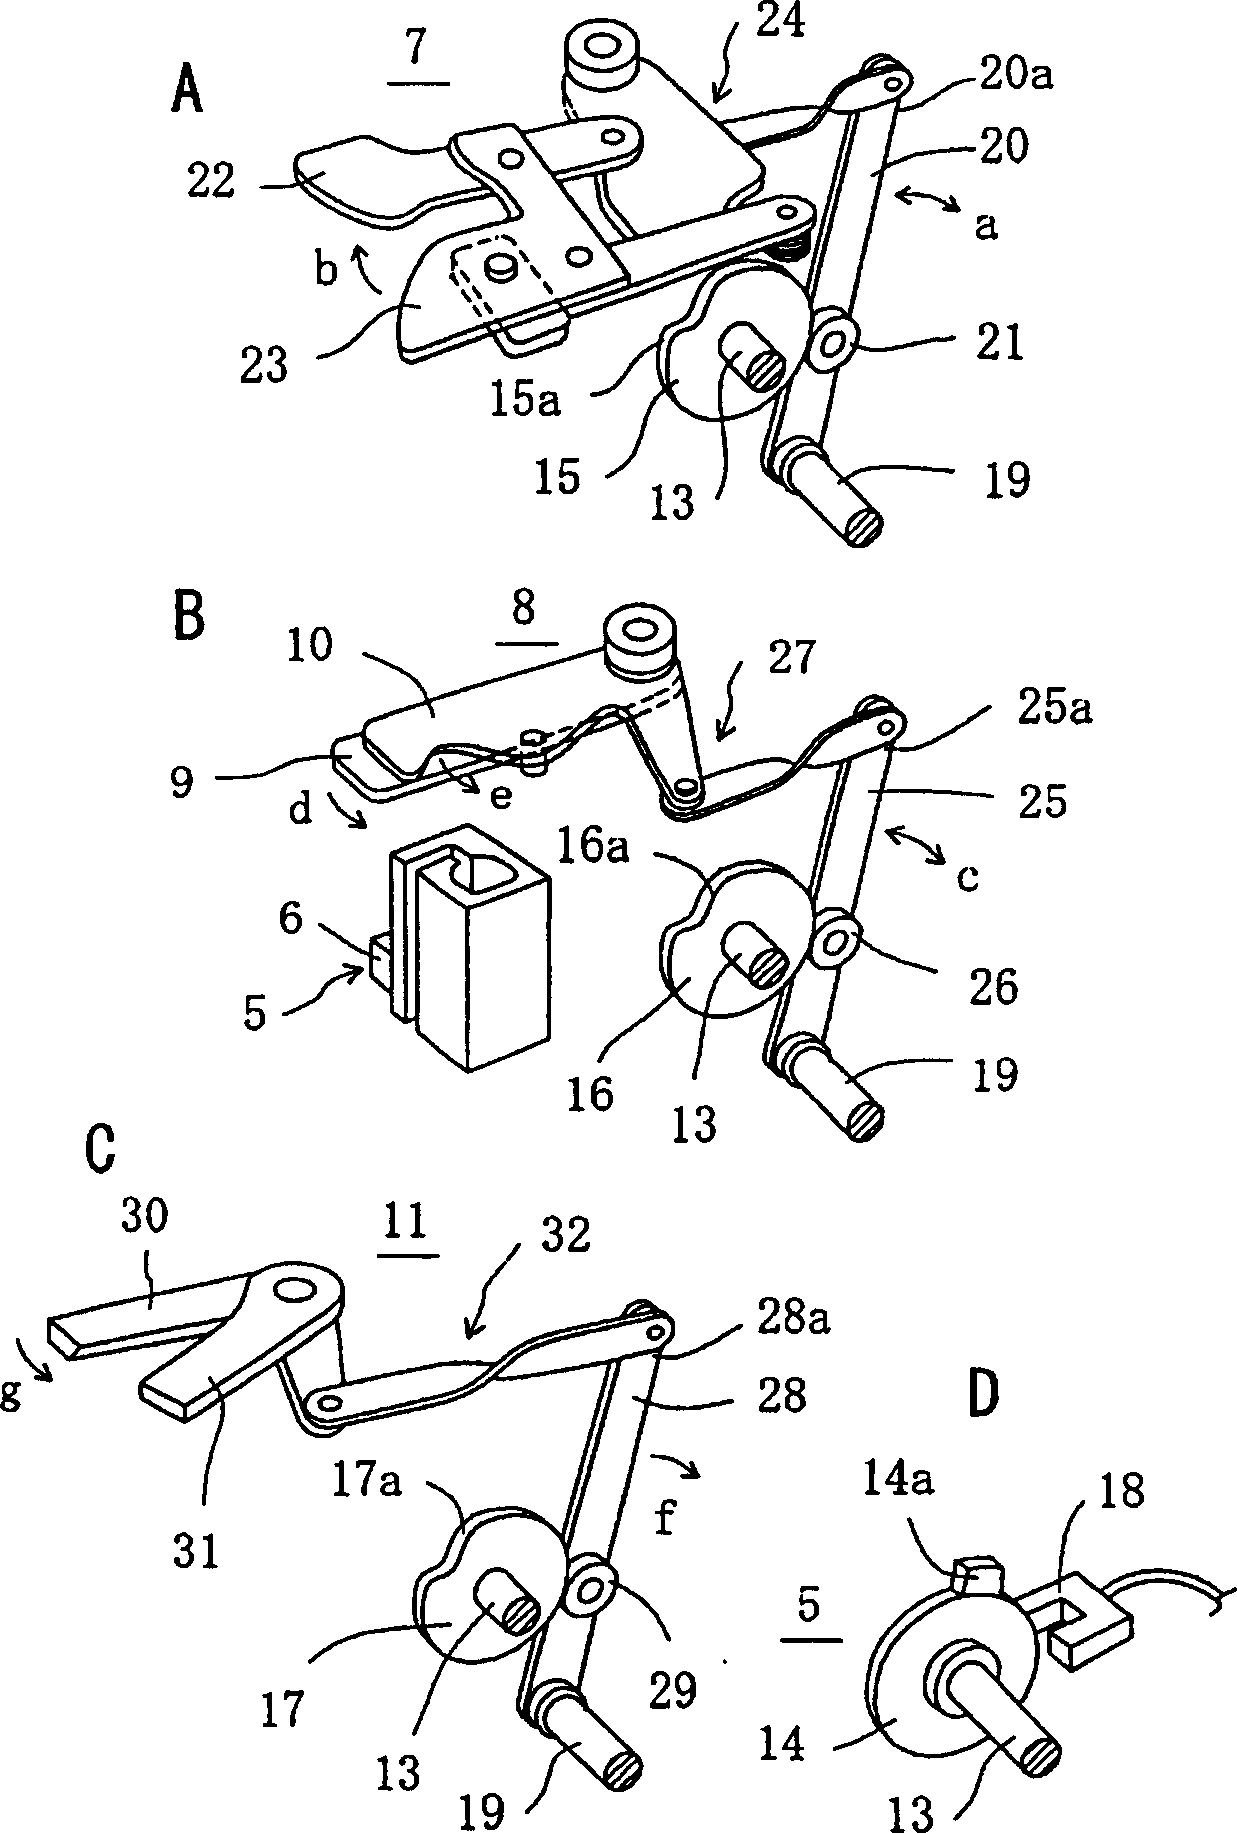 Yarn joining device and handy splicer